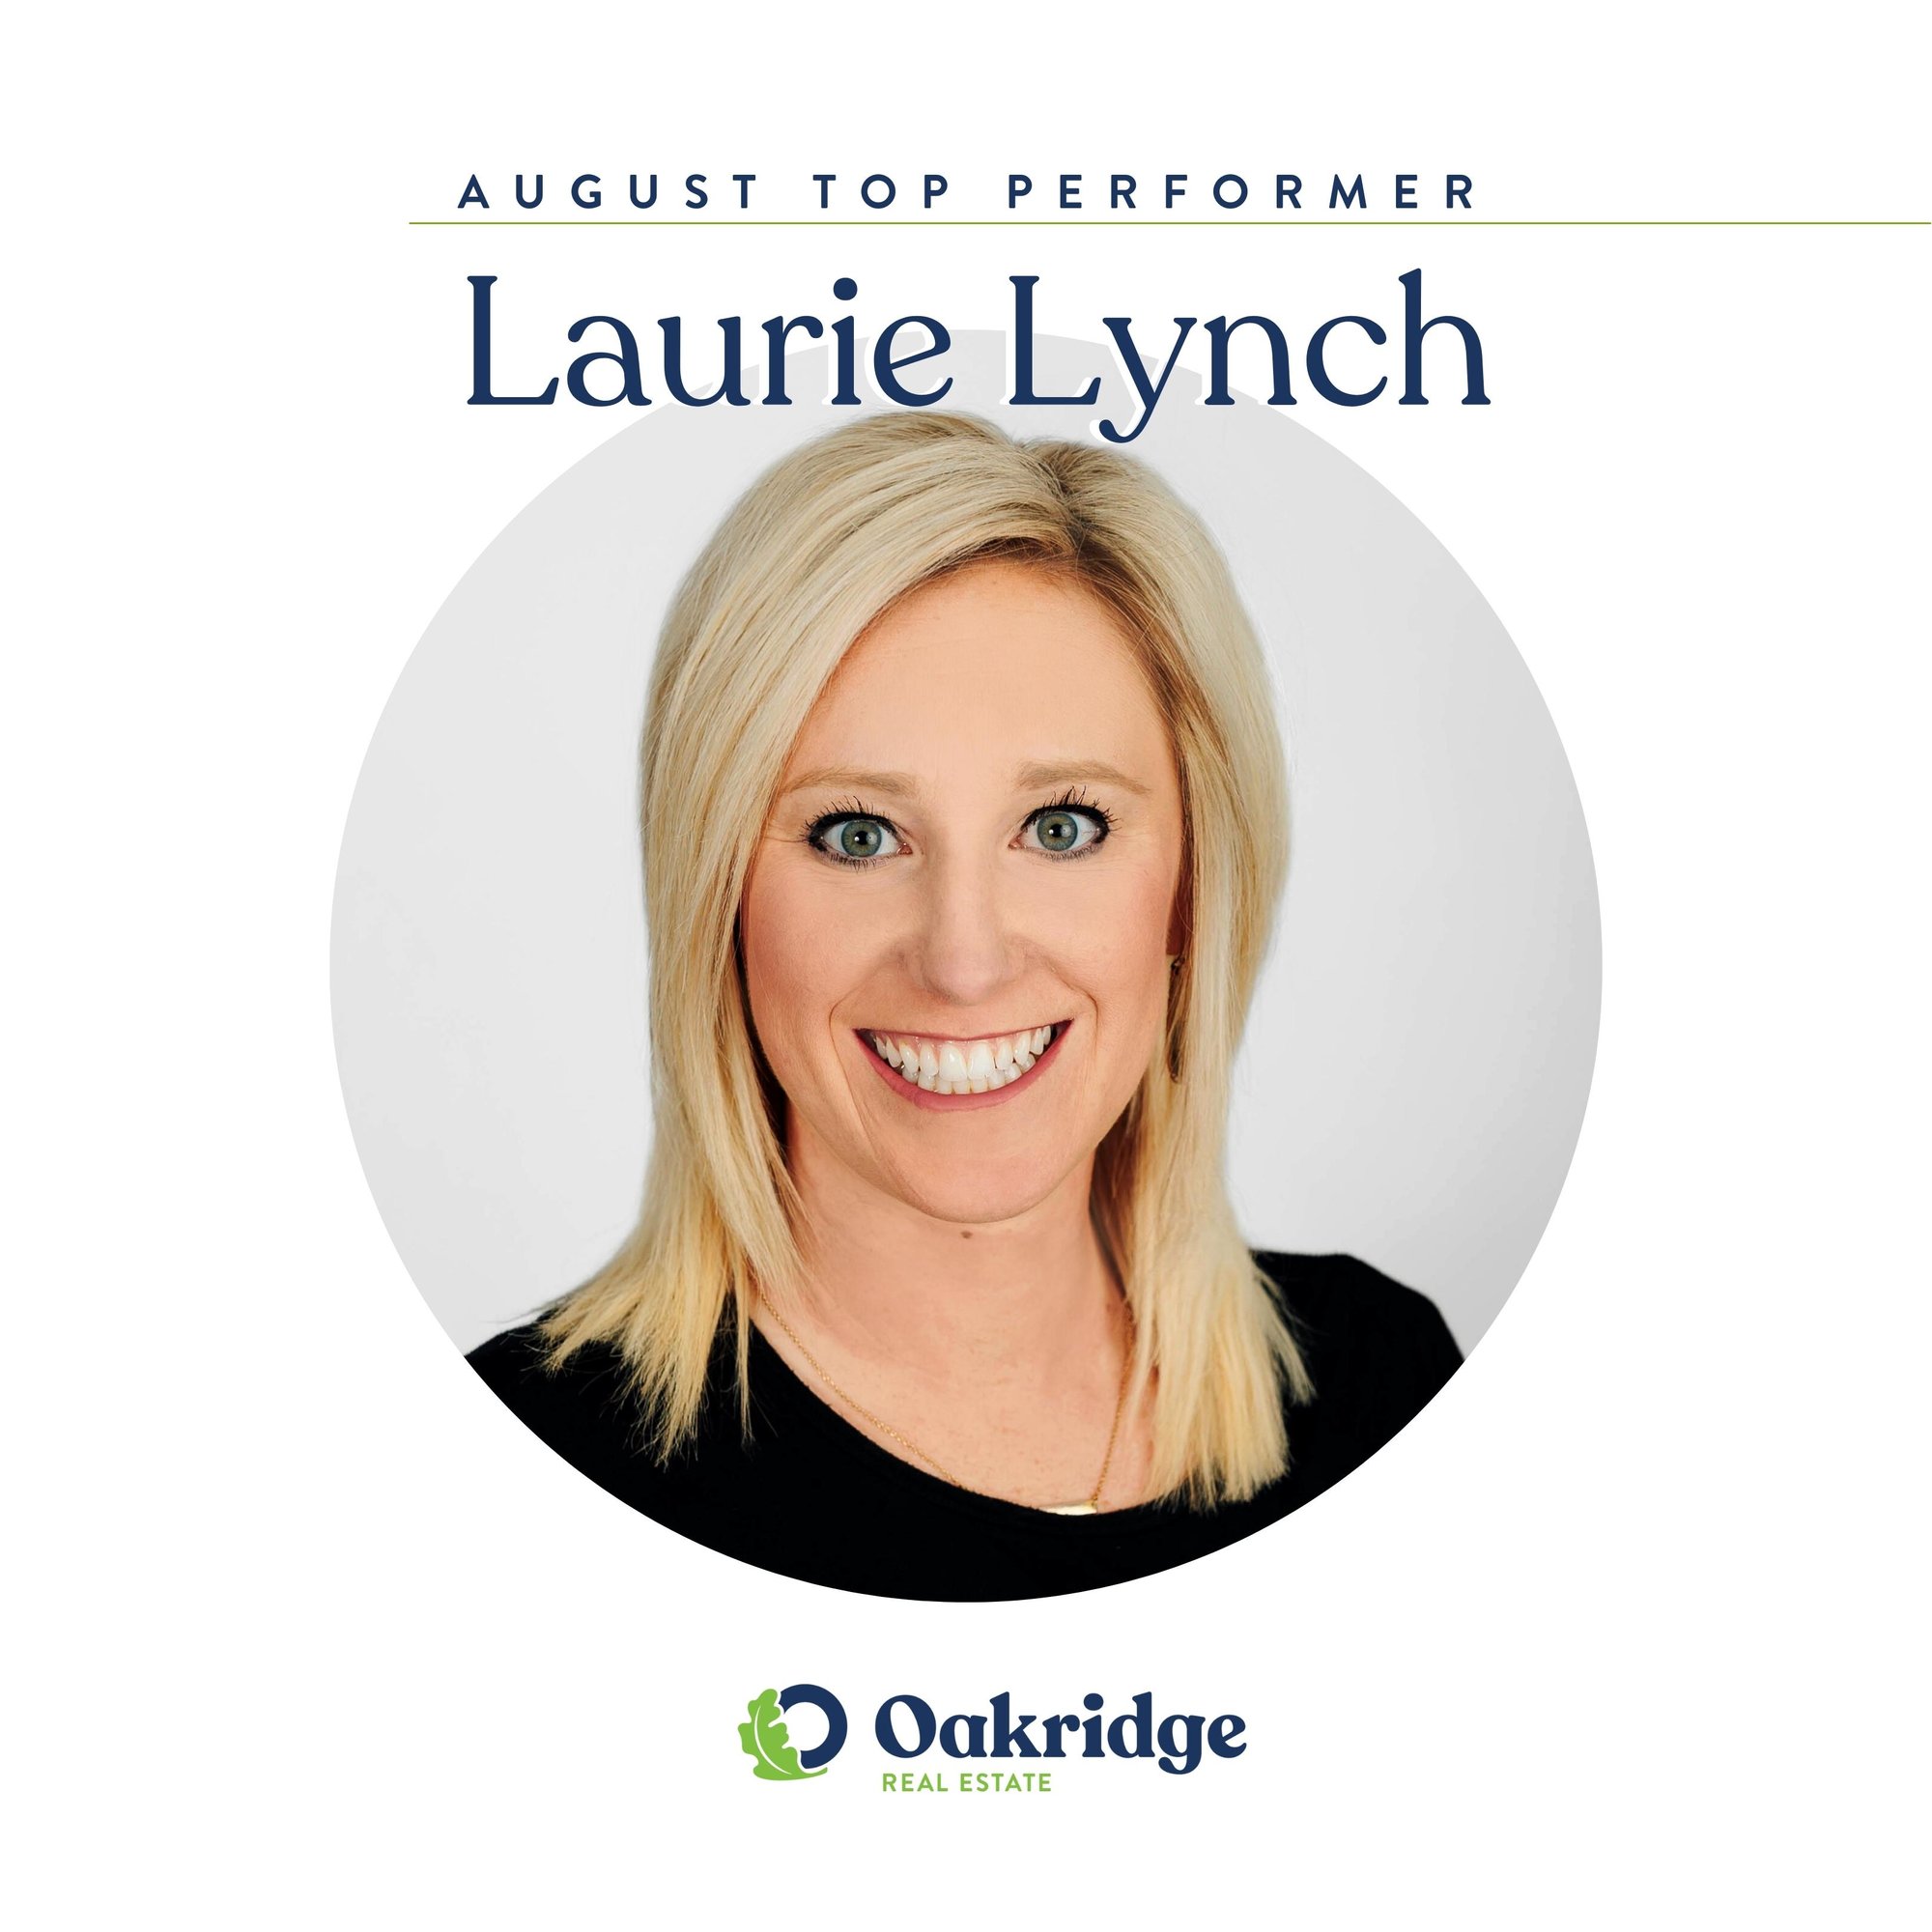 Laurie Lynch Oakridge Real Estate Top Performer